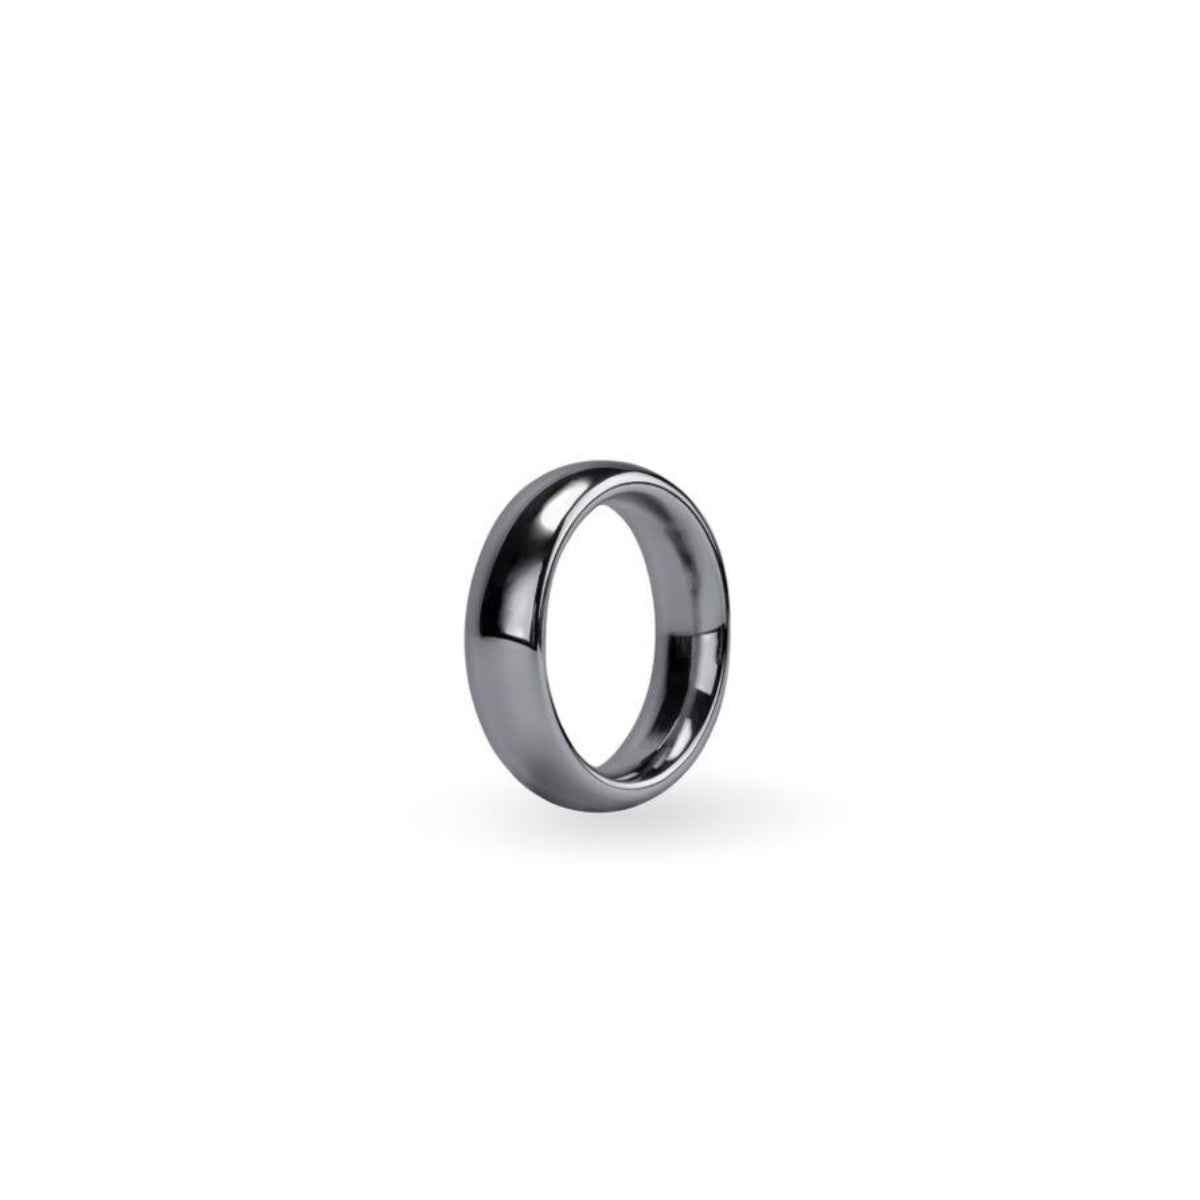 Prowler RED Aluminum Cock Ring 45mm Silver - Simply Pleasure